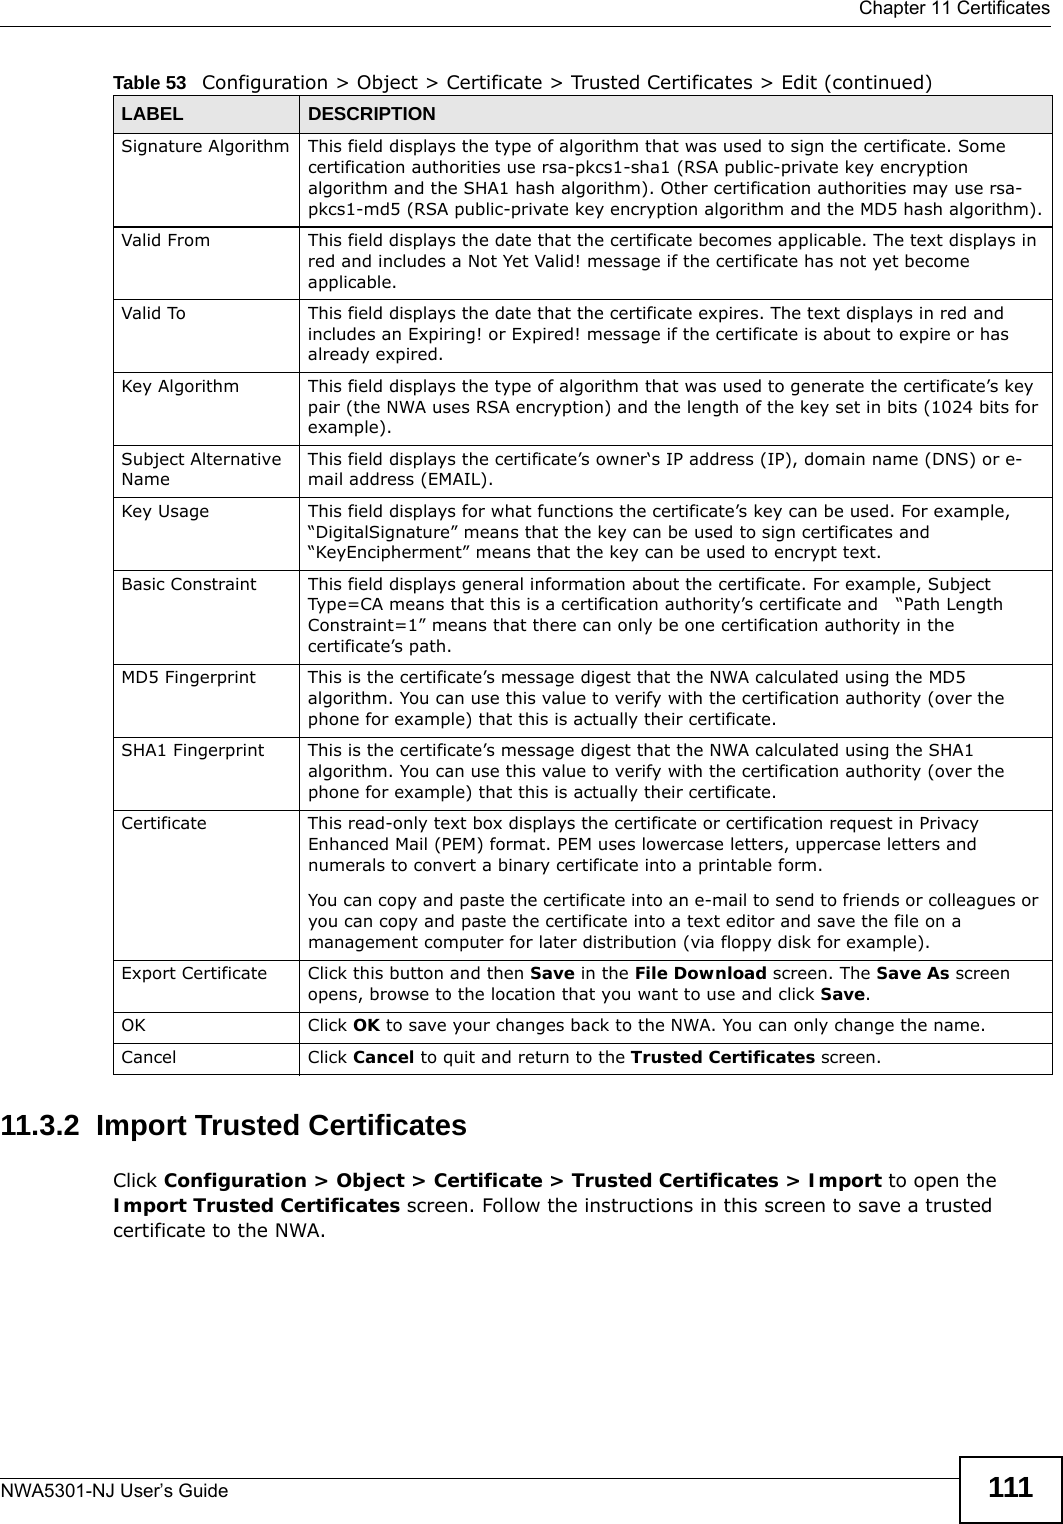  Chapter 11 CertificatesNWA5301-NJ User’s Guide 11111.3.2  Import Trusted CertificatesClick Configuration &gt; Object &gt; Certificate &gt; Trusted Certificates &gt; Import to open the Import Trusted Certificates screen. Follow the instructions in this screen to save a trusted certificate to the NWA.Signature Algorithm This field displays the type of algorithm that was used to sign the certificate. Some certification authorities use rsa-pkcs1-sha1 (RSA public-private key encryption algorithm and the SHA1 hash algorithm). Other certification authorities may use rsa-pkcs1-md5 (RSA public-private key encryption algorithm and the MD5 hash algorithm).Valid From This field displays the date that the certificate becomes applicable. The text displays in red and includes a Not Yet Valid! message if the certificate has not yet become applicable.Valid To This field displays the date that the certificate expires. The text displays in red and includes an Expiring! or Expired! message if the certificate is about to expire or has already expired.Key Algorithm This field displays the type of algorithm that was used to generate the certificate’s key pair (the NWA uses RSA encryption) and the length of the key set in bits (1024 bits for example).Subject Alternative NameThis field displays the certificate’s owner‘s IP address (IP), domain name (DNS) or e-mail address (EMAIL).Key Usage This field displays for what functions the certificate’s key can be used. For example, “DigitalSignature” means that the key can be used to sign certificates and “KeyEncipherment” means that the key can be used to encrypt text.Basic Constraint This field displays general information about the certificate. For example, Subject Type=CA means that this is a certification authority’s certificate and   “Path Length Constraint=1” means that there can only be one certification authority in the certificate’s path.MD5 Fingerprint This is the certificate’s message digest that the NWA calculated using the MD5 algorithm. You can use this value to verify with the certification authority (over the phone for example) that this is actually their certificate. SHA1 Fingerprint This is the certificate’s message digest that the NWA calculated using the SHA1 algorithm. You can use this value to verify with the certification authority (over the phone for example) that this is actually their certificate.Certificate This read-only text box displays the certificate or certification request in Privacy Enhanced Mail (PEM) format. PEM uses lowercase letters, uppercase letters and numerals to convert a binary certificate into a printable form.You can copy and paste the certificate into an e-mail to send to friends or colleagues or you can copy and paste the certificate into a text editor and save the file on a management computer for later distribution (via floppy disk for example).Export Certificate Click this button and then Save in the File Download screen. The Save As screen opens, browse to the location that you want to use and click Save.OK Click OK to save your changes back to the NWA. You can only change the name.Cancel Click Cancel to quit and return to the Trusted Certificates screen.Table 53   Configuration &gt; Object &gt; Certificate &gt; Trusted Certificates &gt; Edit (continued)LABEL DESCRIPTION